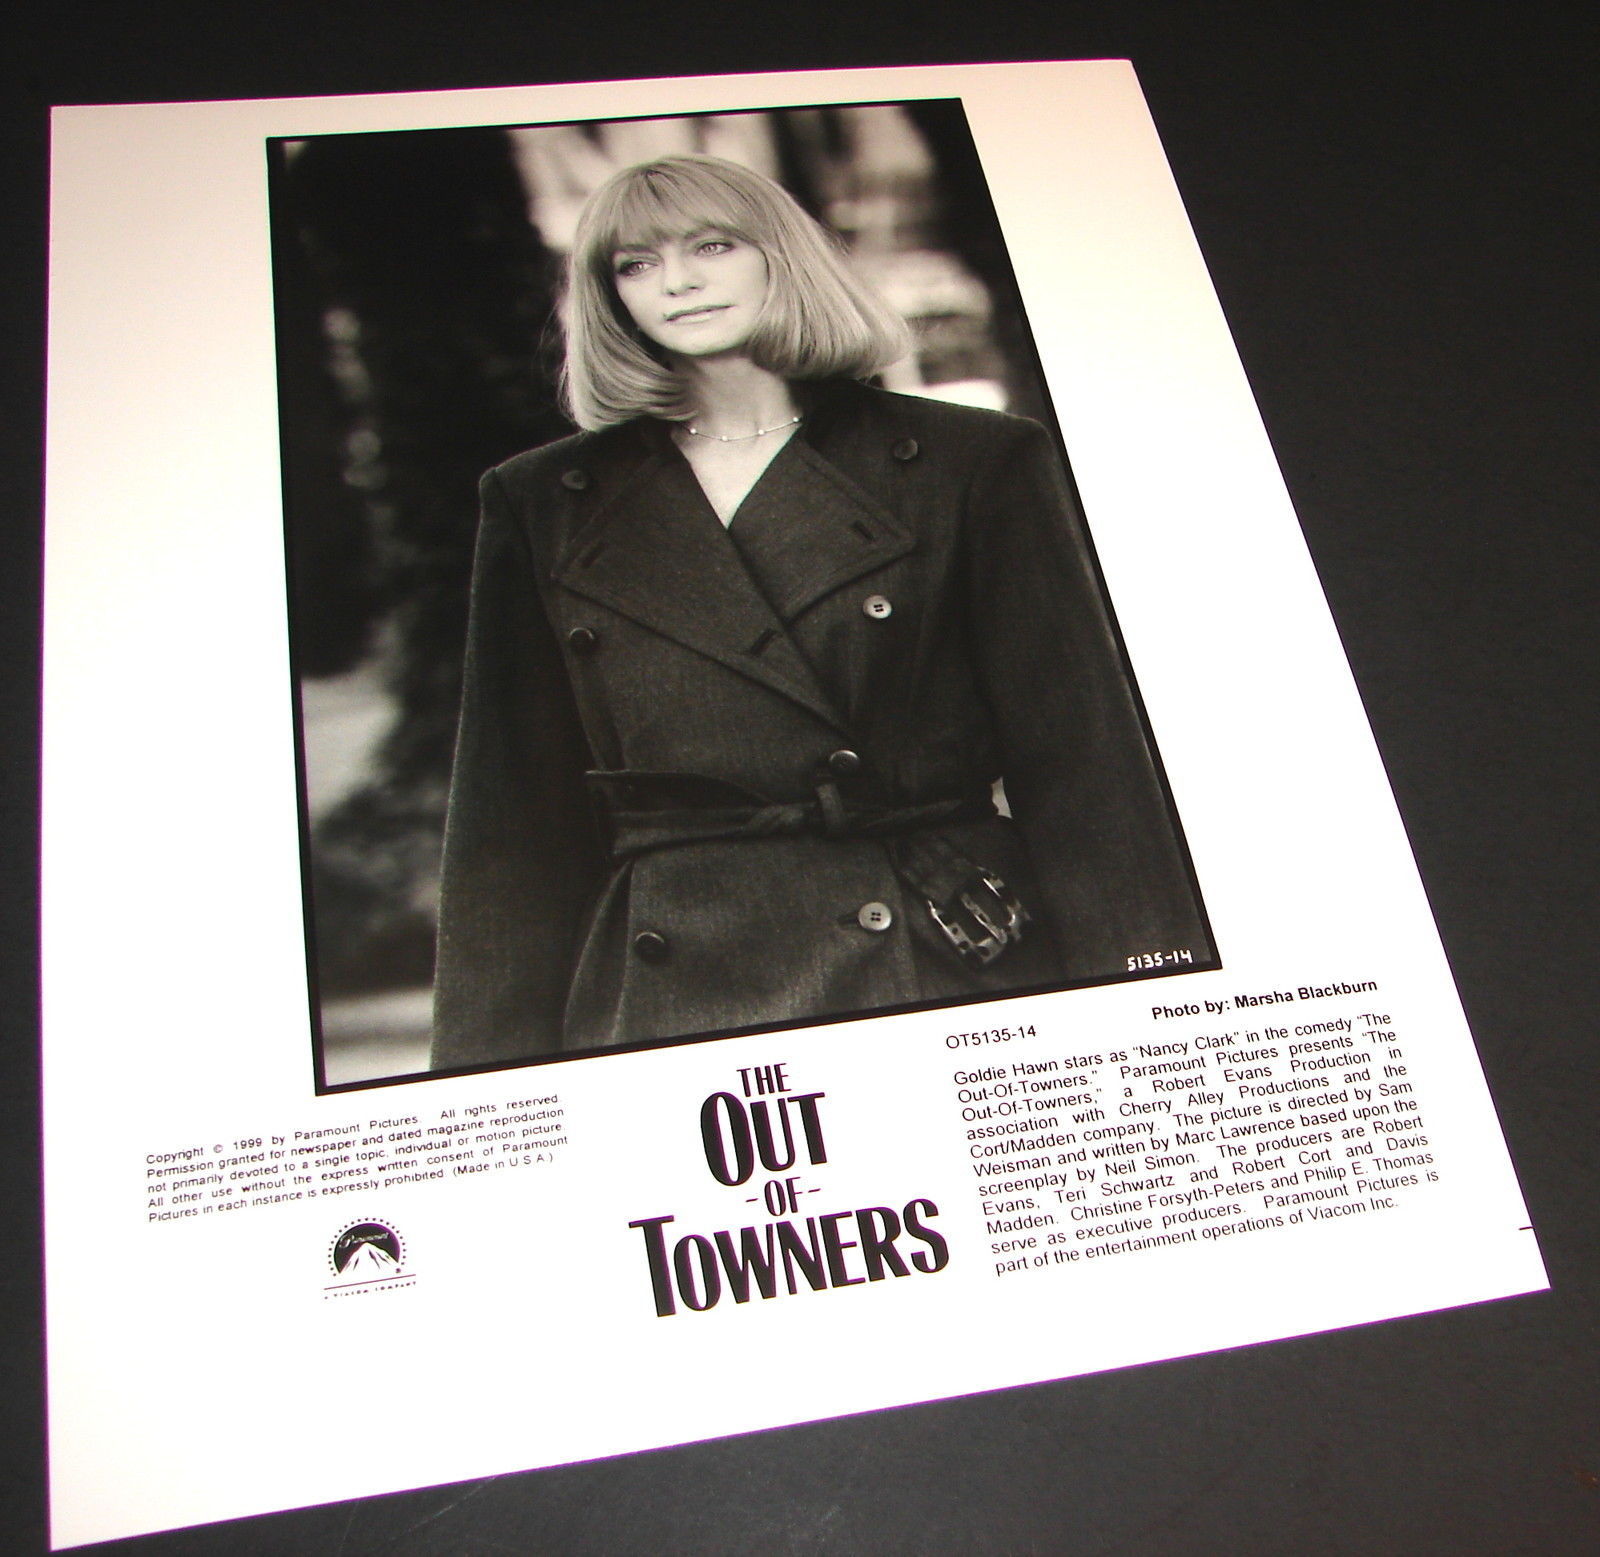 Primary image for 1999 Movie THE OUT OF TOWNERS Press 8x10 Photo Goldie Hawn OT5135-14